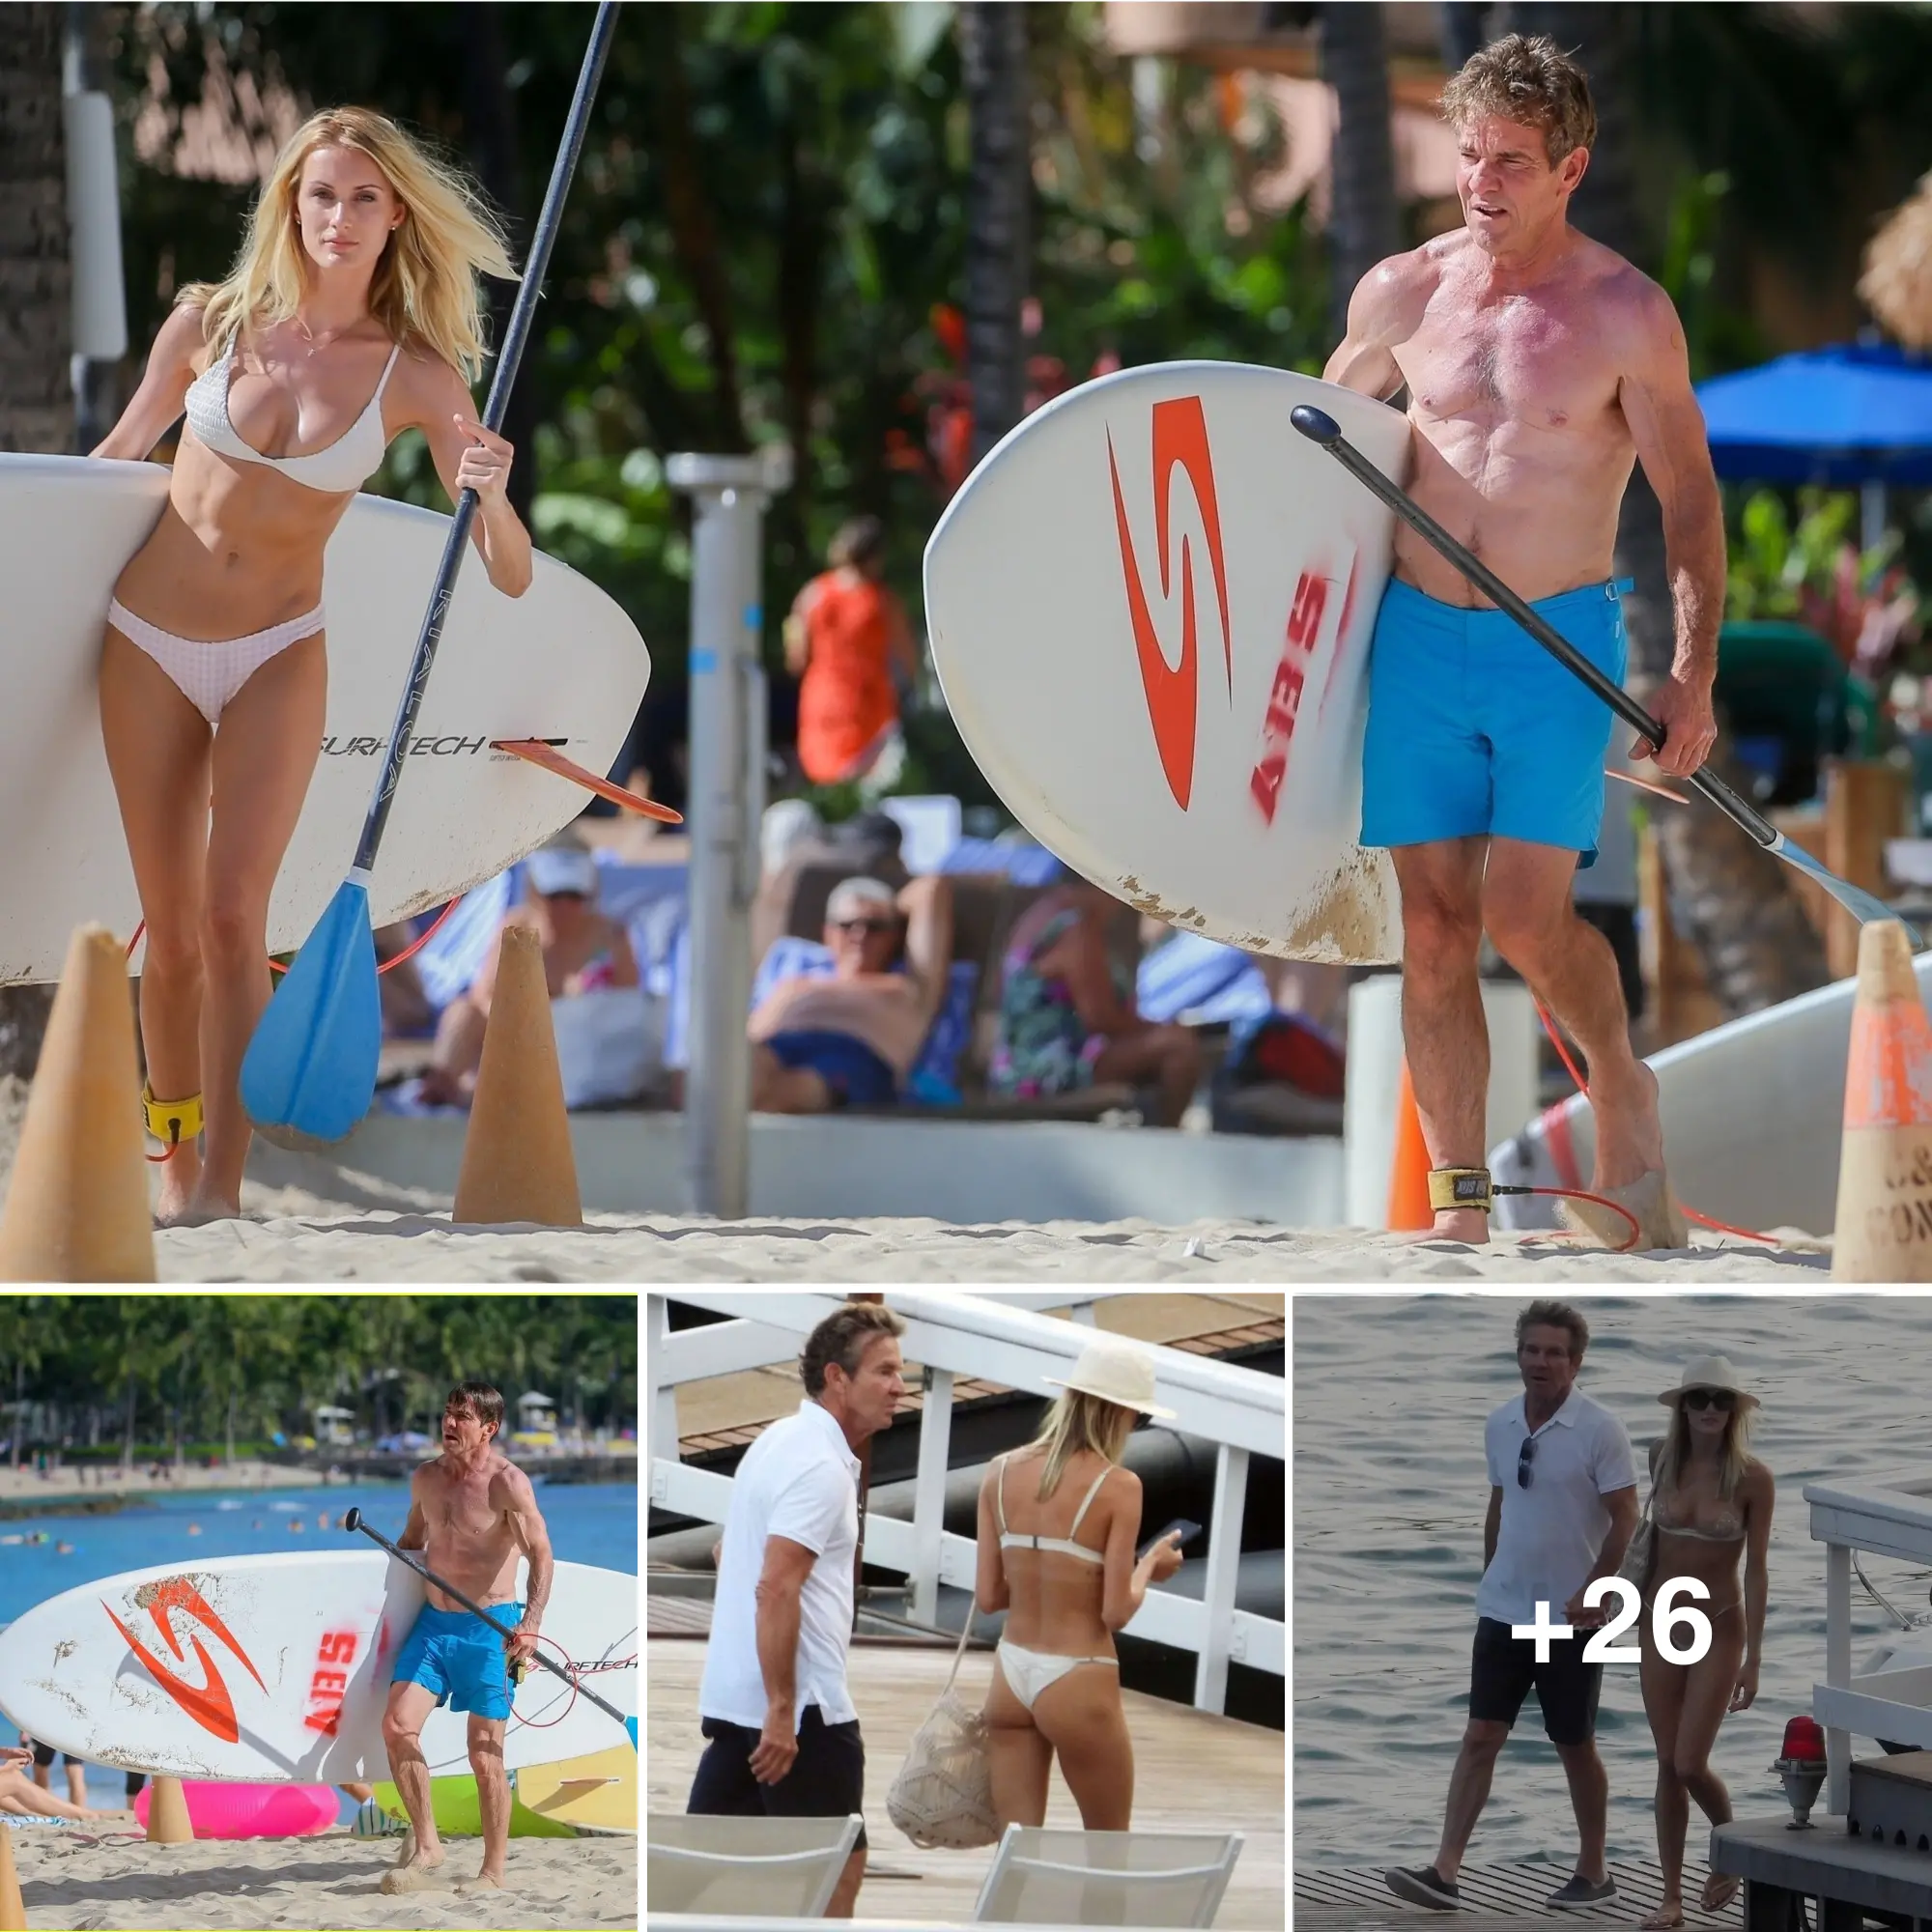 Dennis Quaid, 70, enjoys vacation with wife Laura Savoie, 30, on Hawaii beach 'I've been married 4 times and I'm sure this time is right' - She's the same age as his son